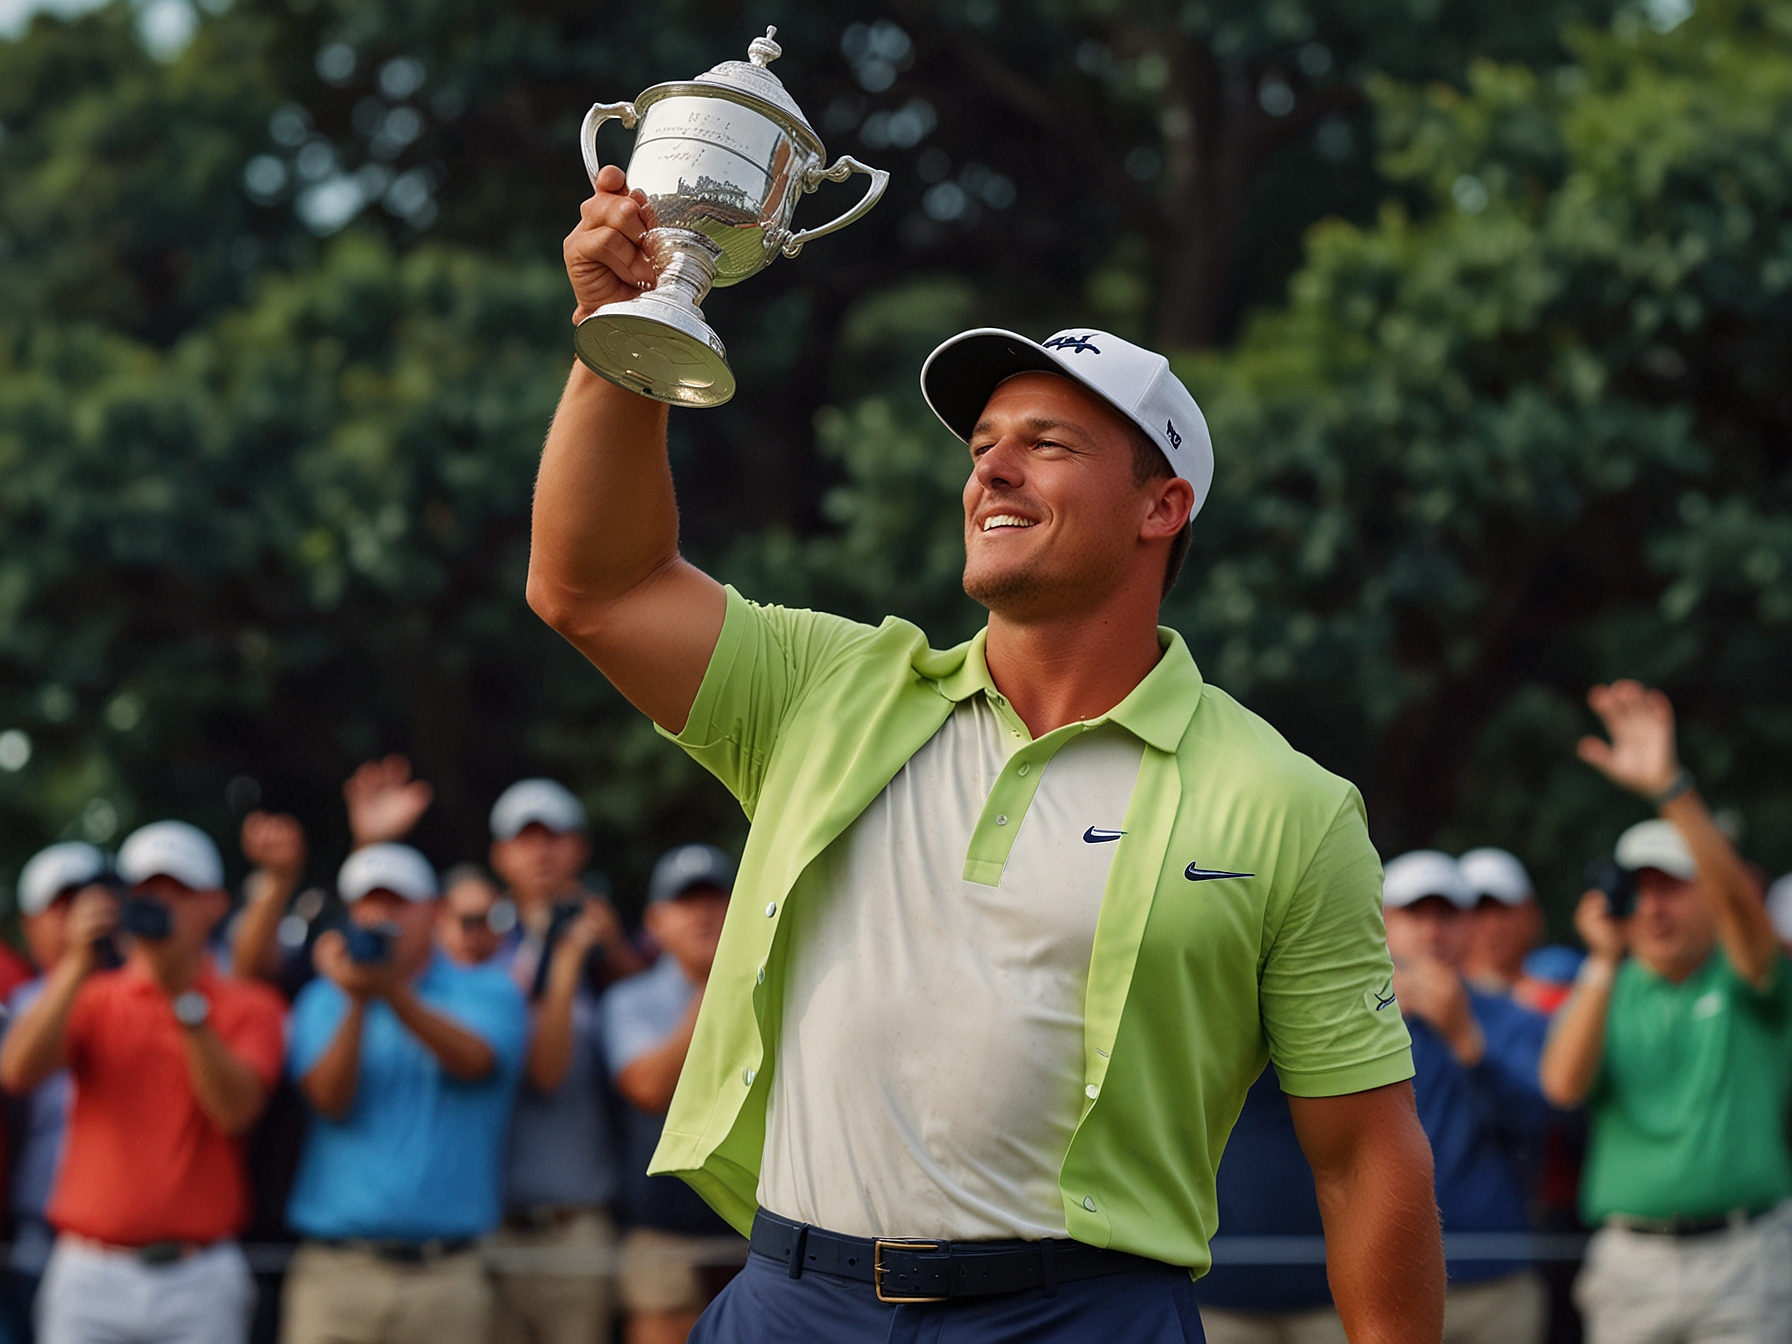 Bryson DeChambeau celebrates his victory at the 120th U.S. Open, holding the trophy aloft at Winged Foot Golf Club. His win exemplifies his unique and analytical approach to the game.